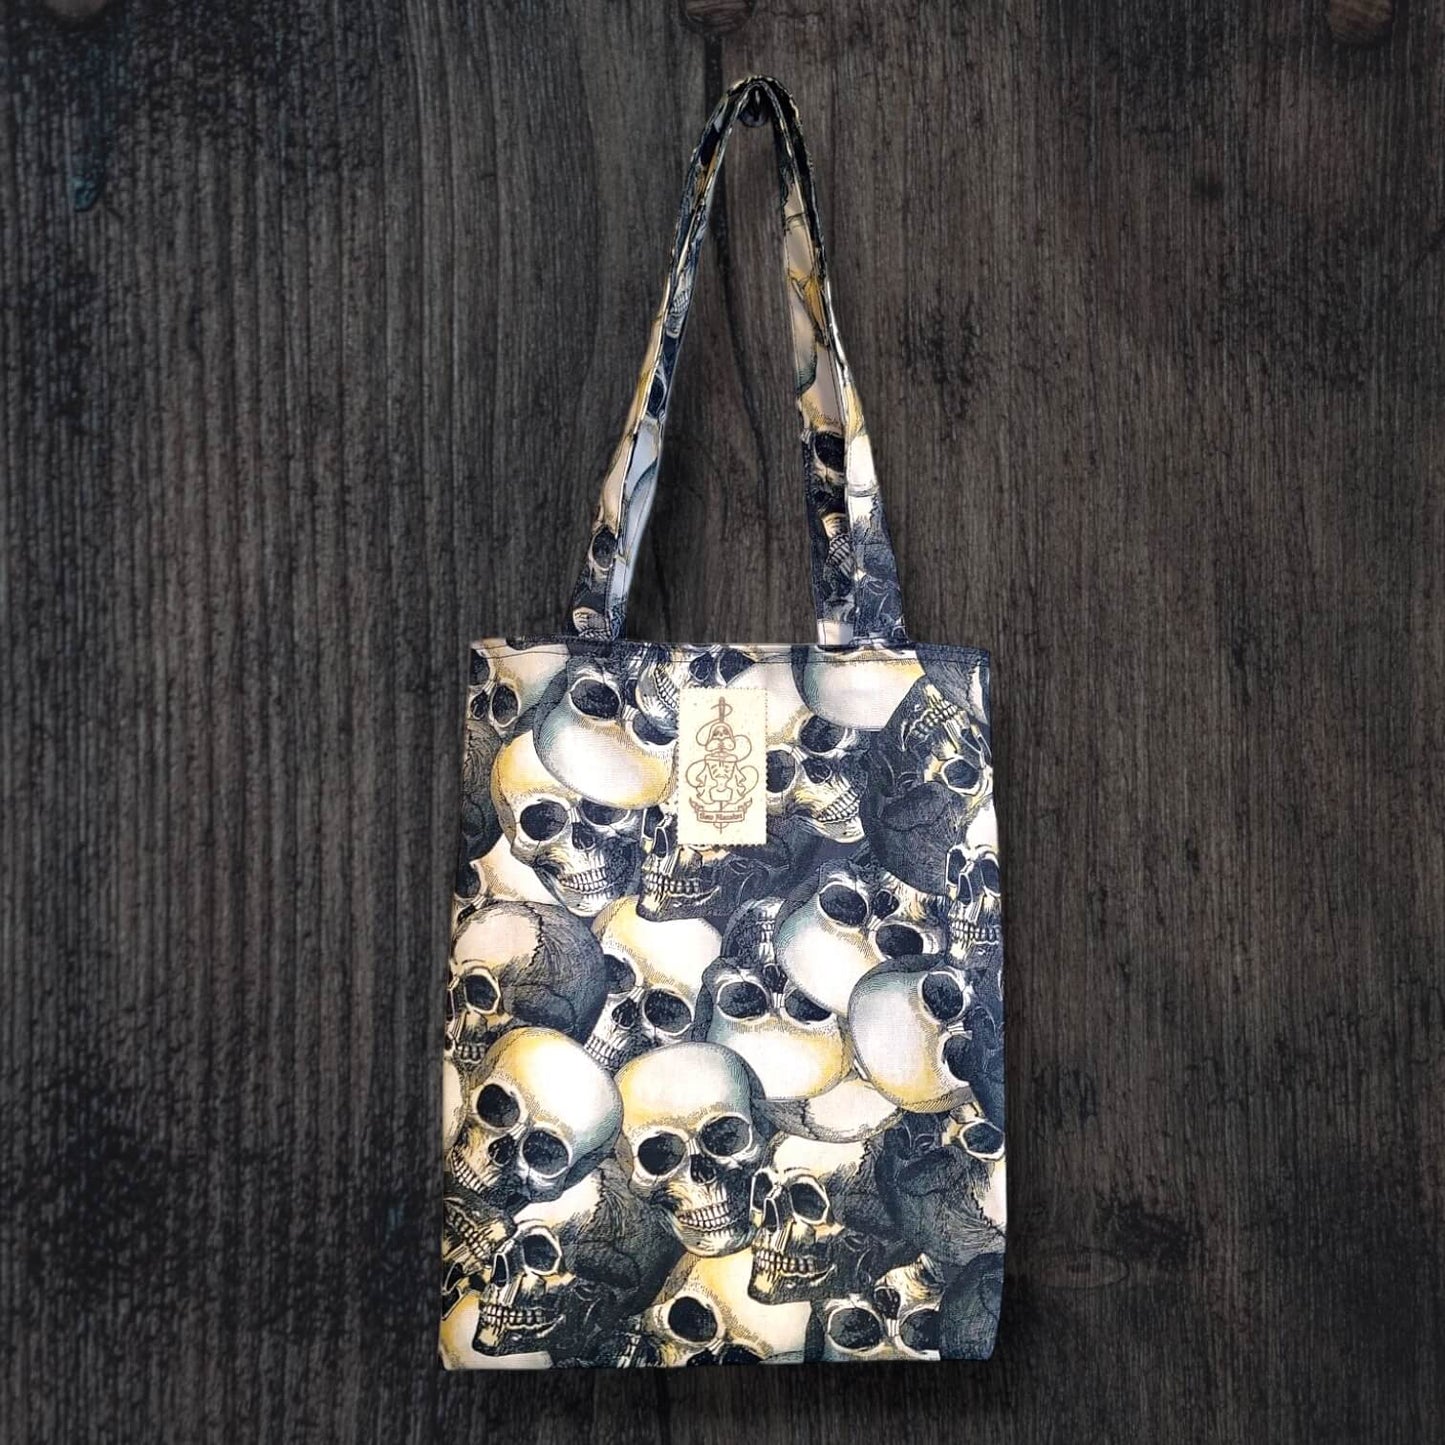 our boxed tote bags featuring our Skull-o-rama pattern.